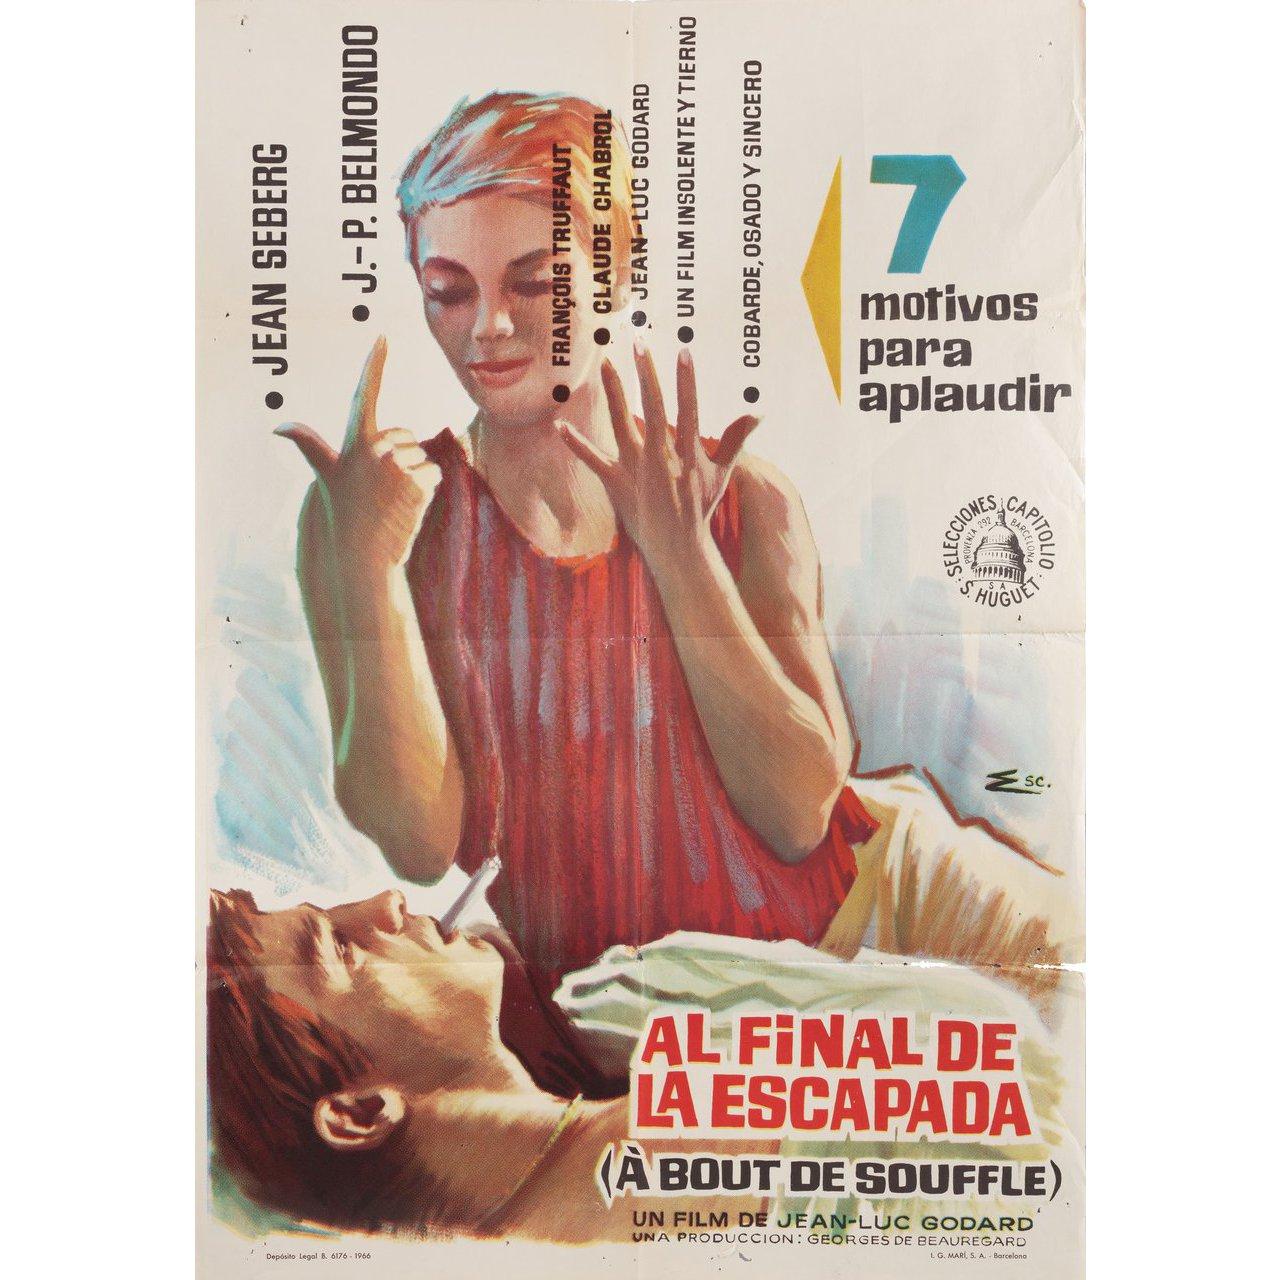 Original 1966 Spanish B1 poster by Carlos Escobar for the first Spanish theatrical release of the 1960 film Breathless (A bout de souffle) directed by Jean-Luc Godard with Jean Seberg / Jean-Paul Belmondo / Daniel Boulanger / Henri-Jacques Huet.